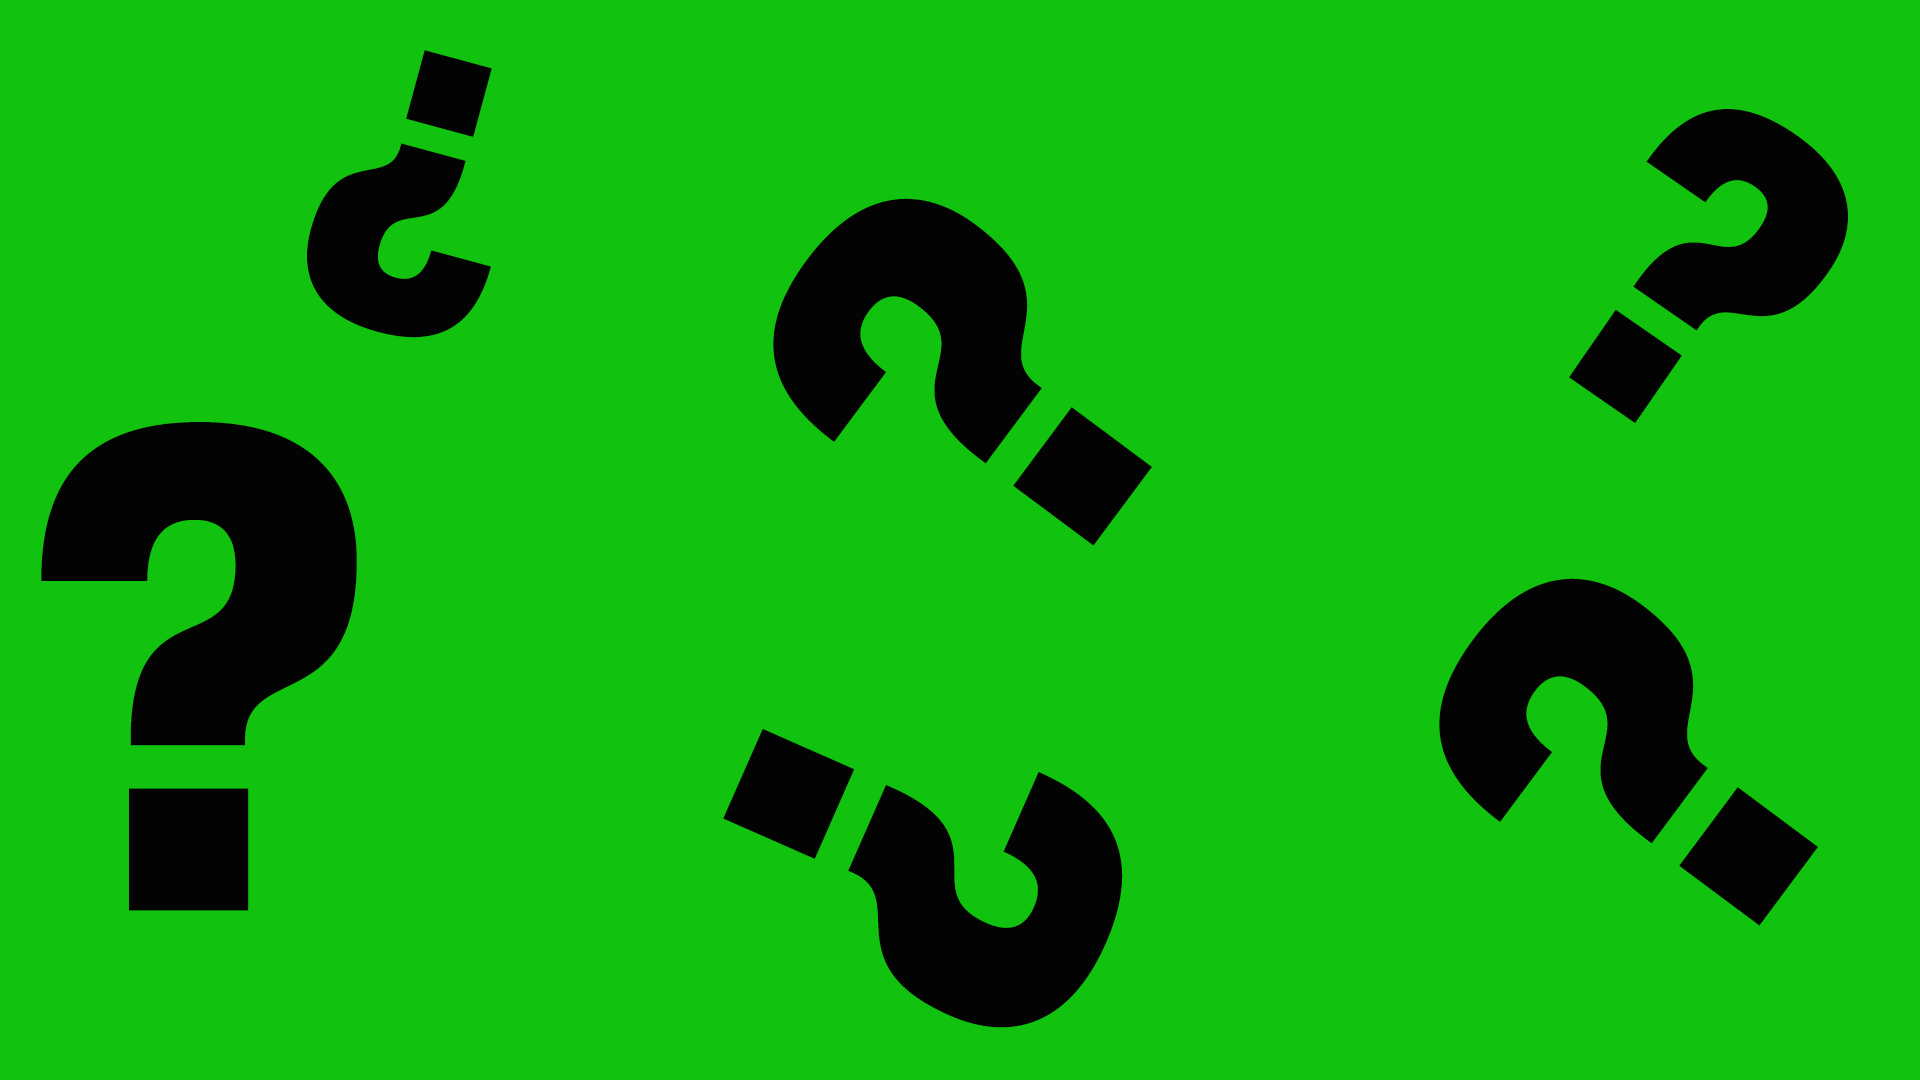 Black question marks on green background